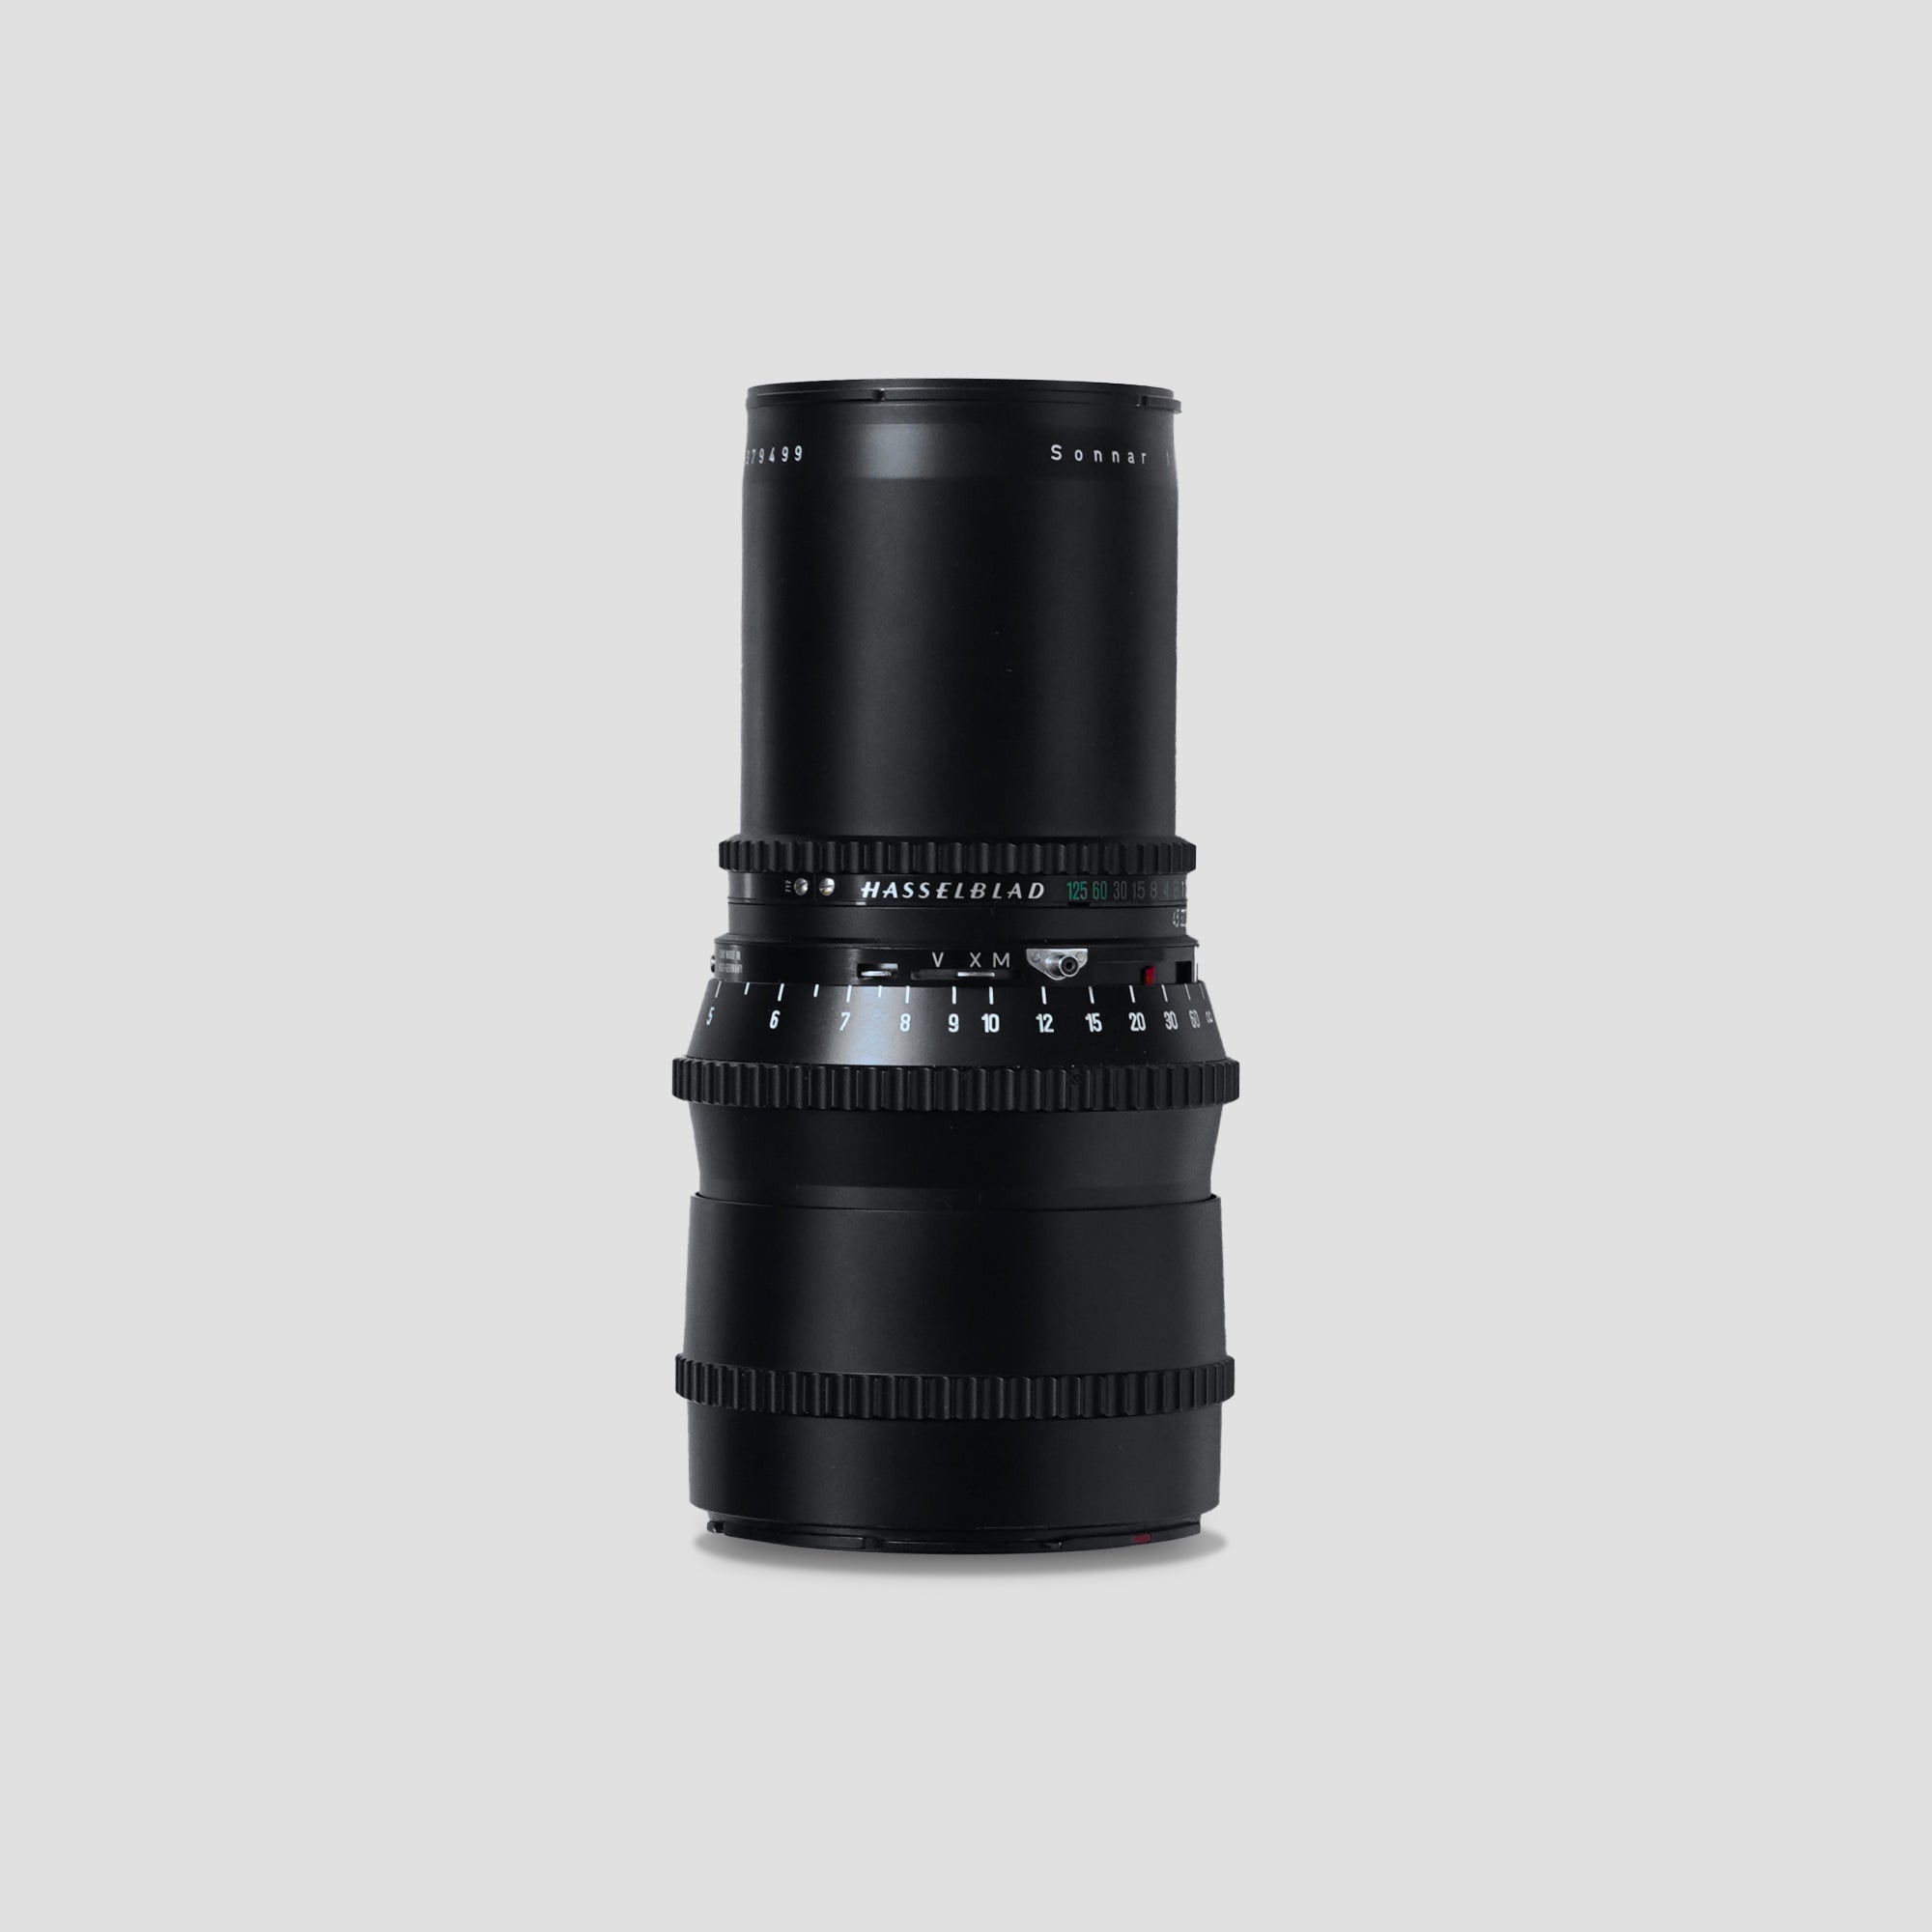 Buy Sonnar 250mm 1:5.6 now at Analogue Amsterdam